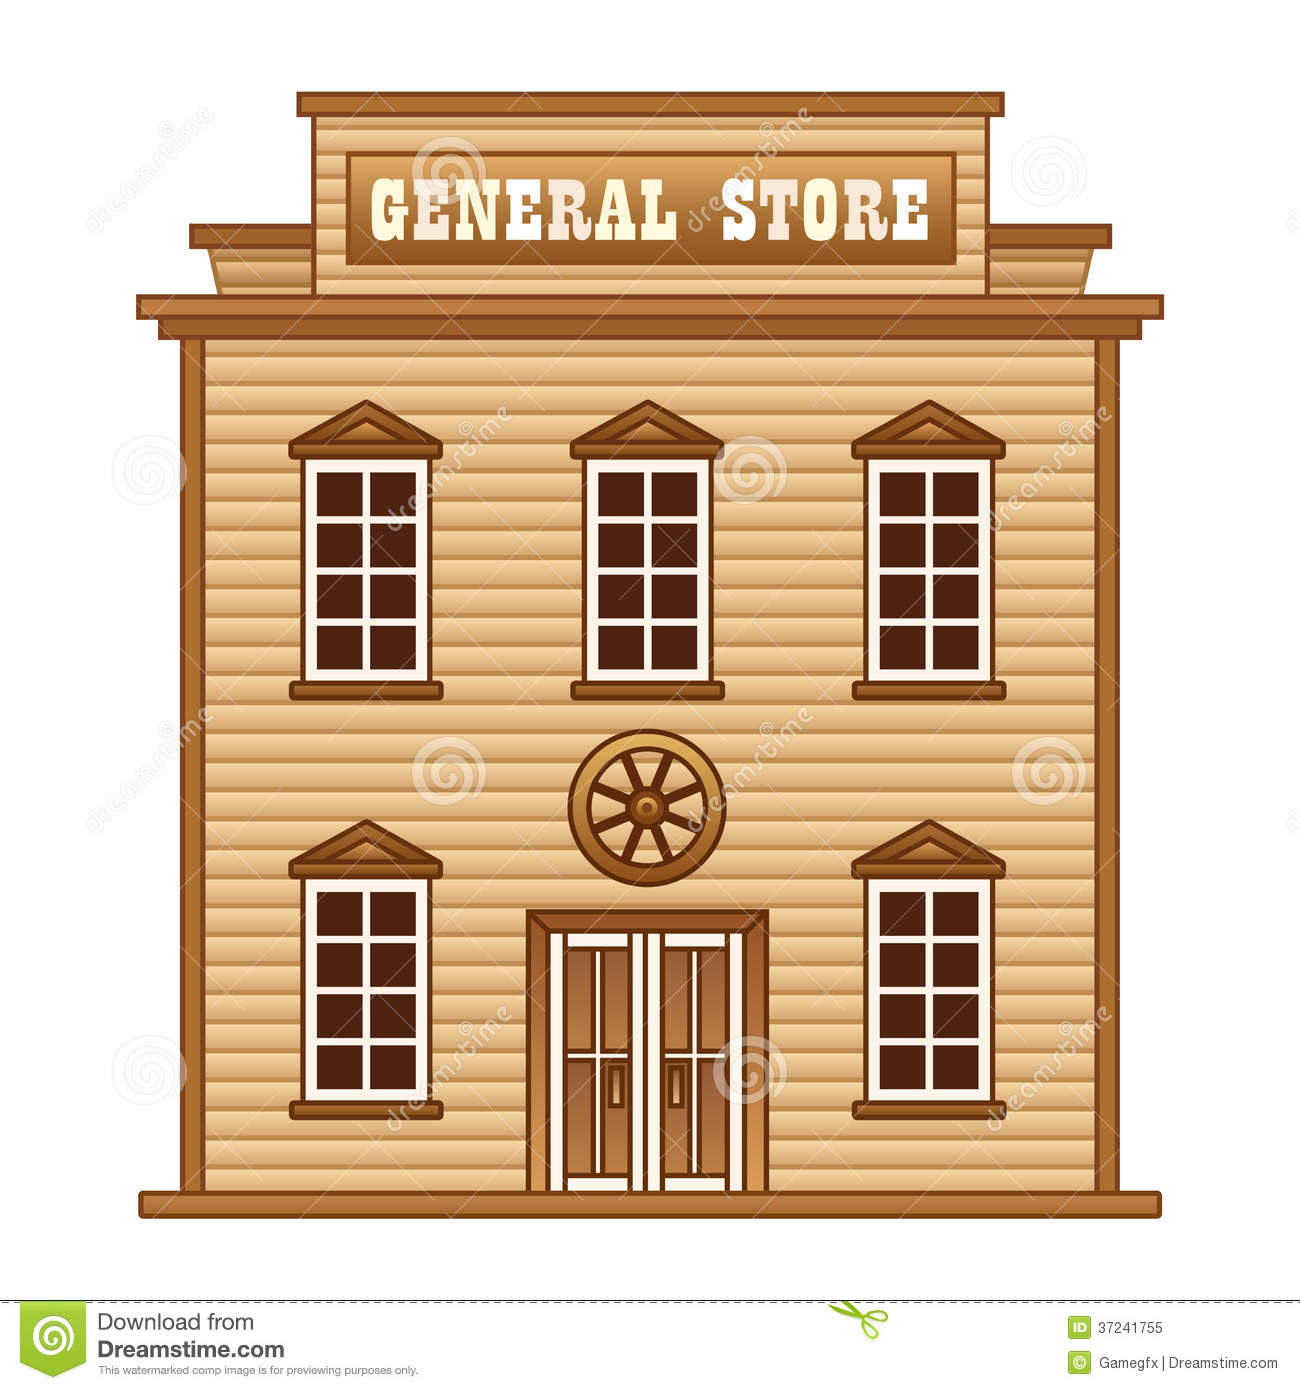 Wild West General Store Royalty Free Stock Photo   Image  37241755